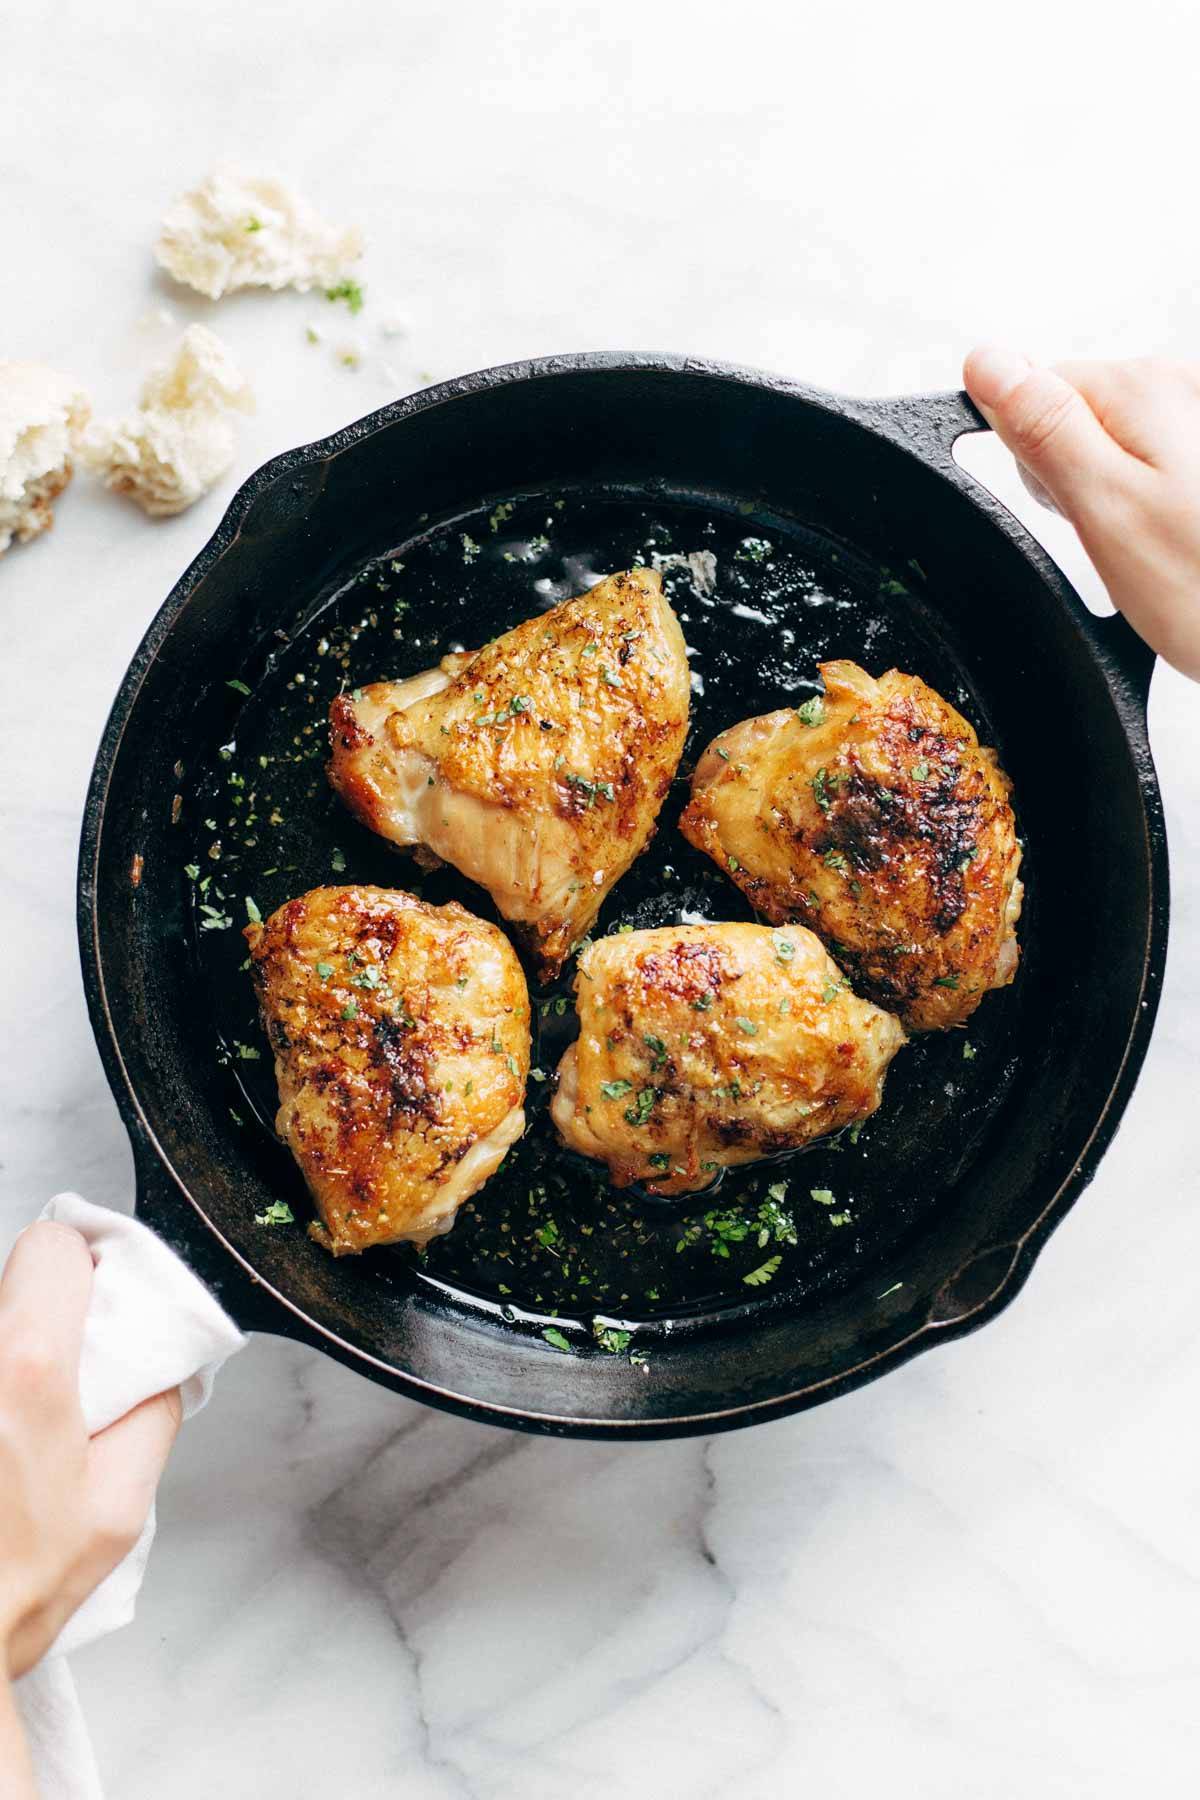 Hands holding a skillet with honey lemon chicken.